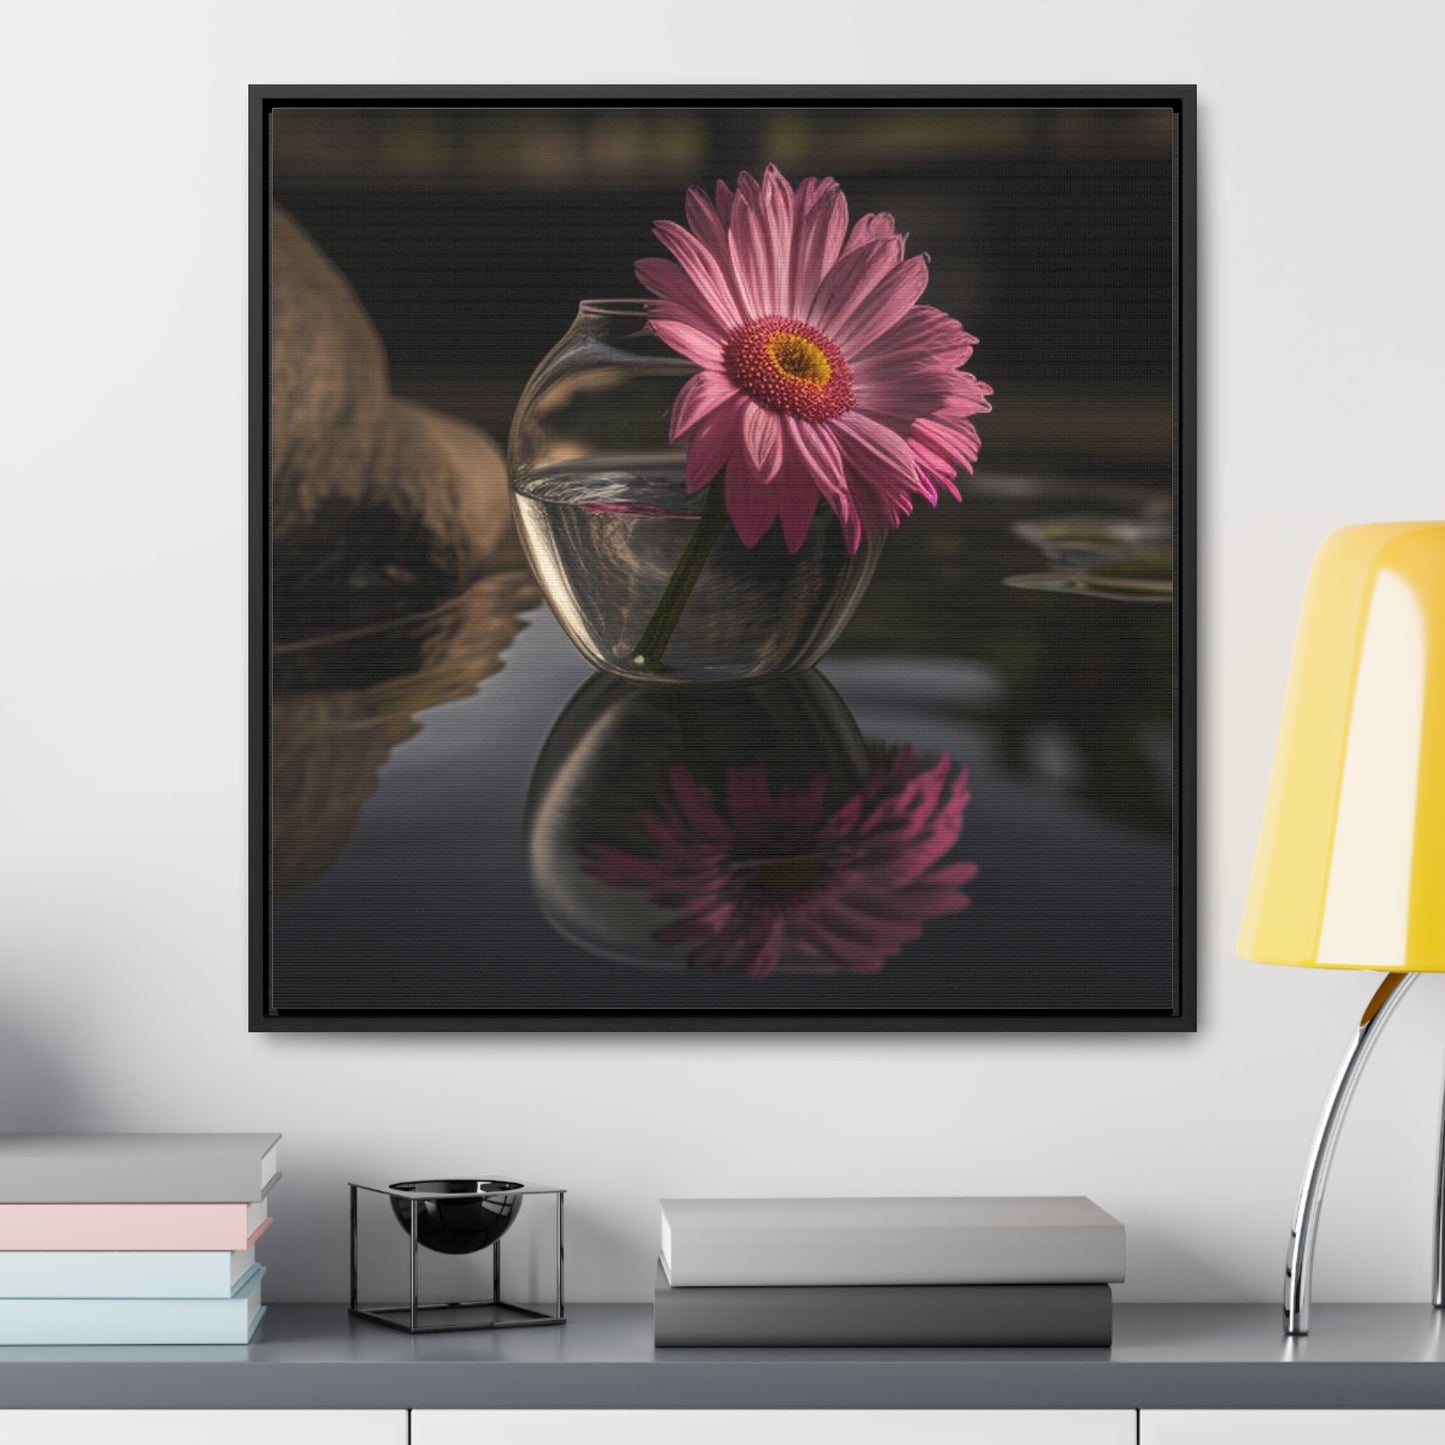 Gallery Canvas Wraps, Square Frame Pink Daisy 2